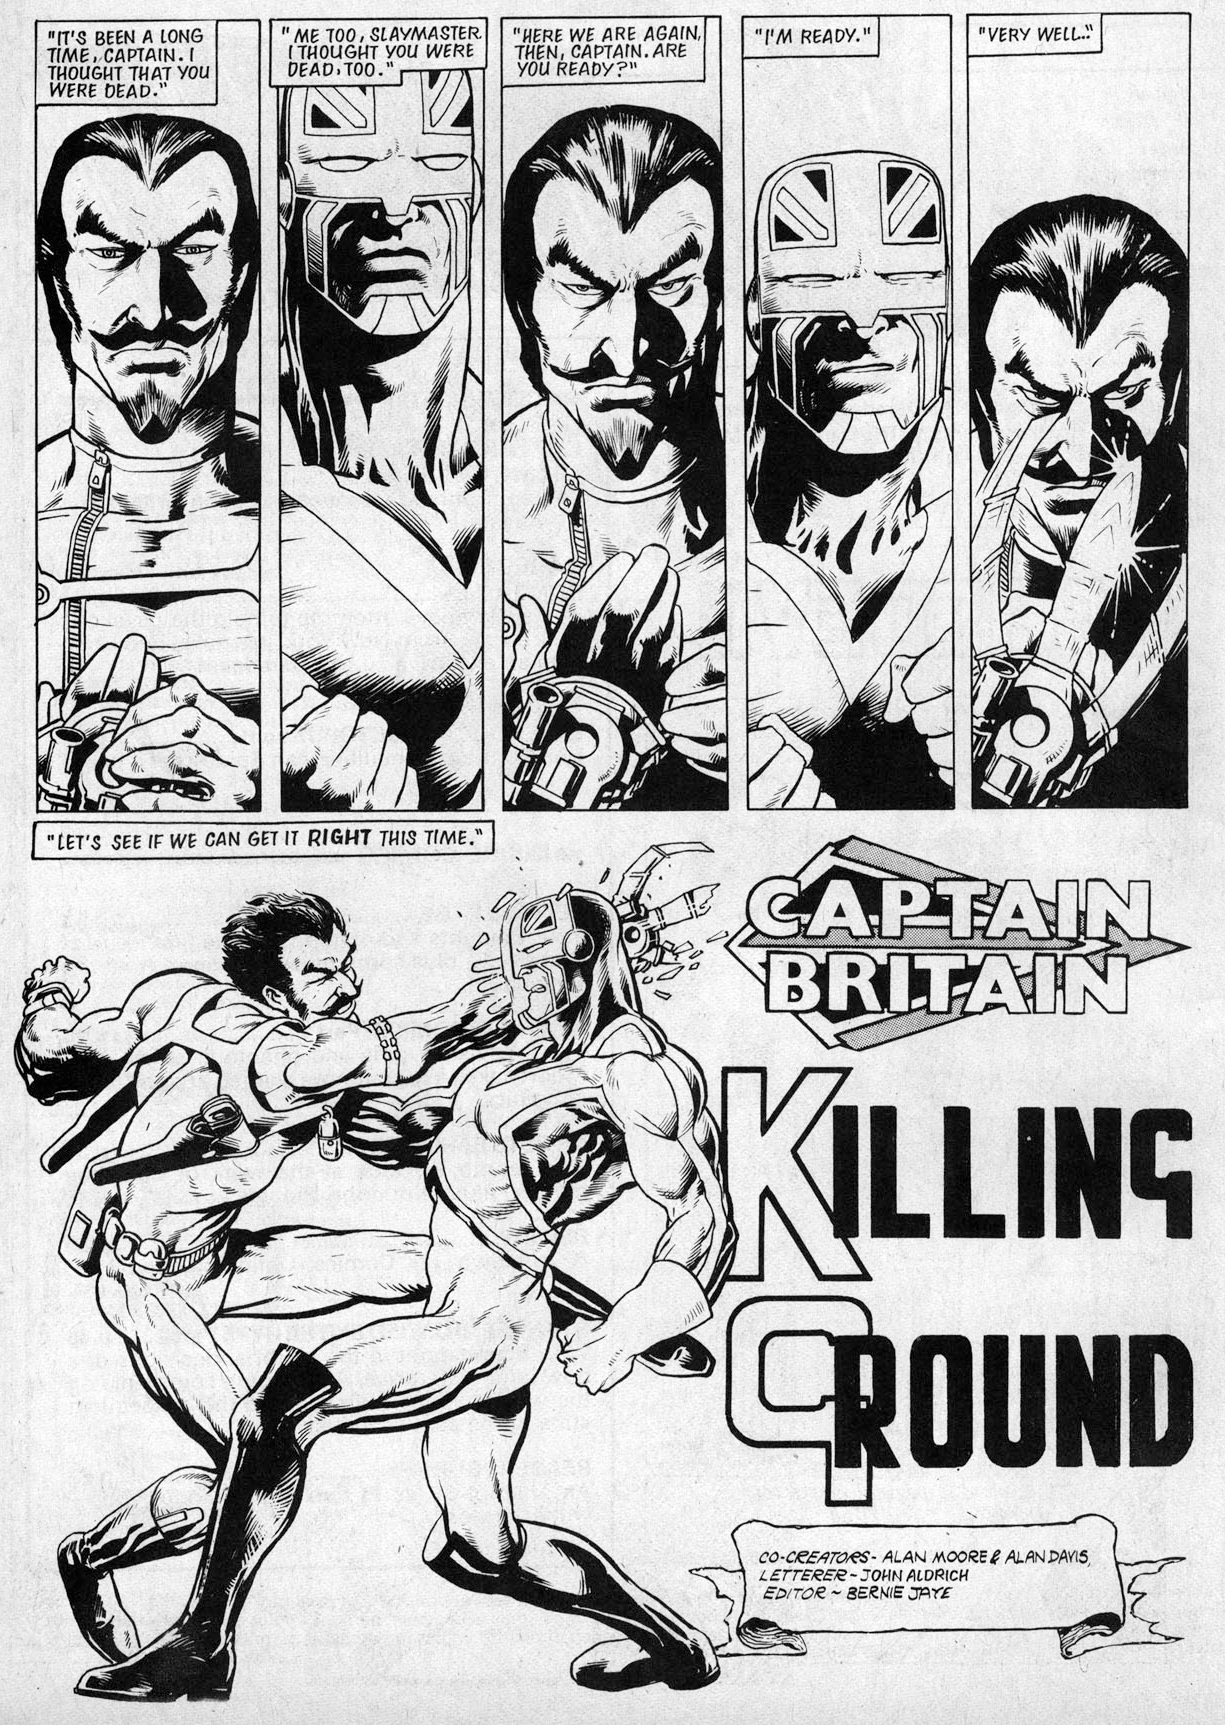 Captain Britain and Slaymaster come to blows in The Daredevils Vol. 1 #4 "Killing Ground" (1983), Marvel Comics. Words by Alan Moore, art by Alan Davis and John Aldrich.